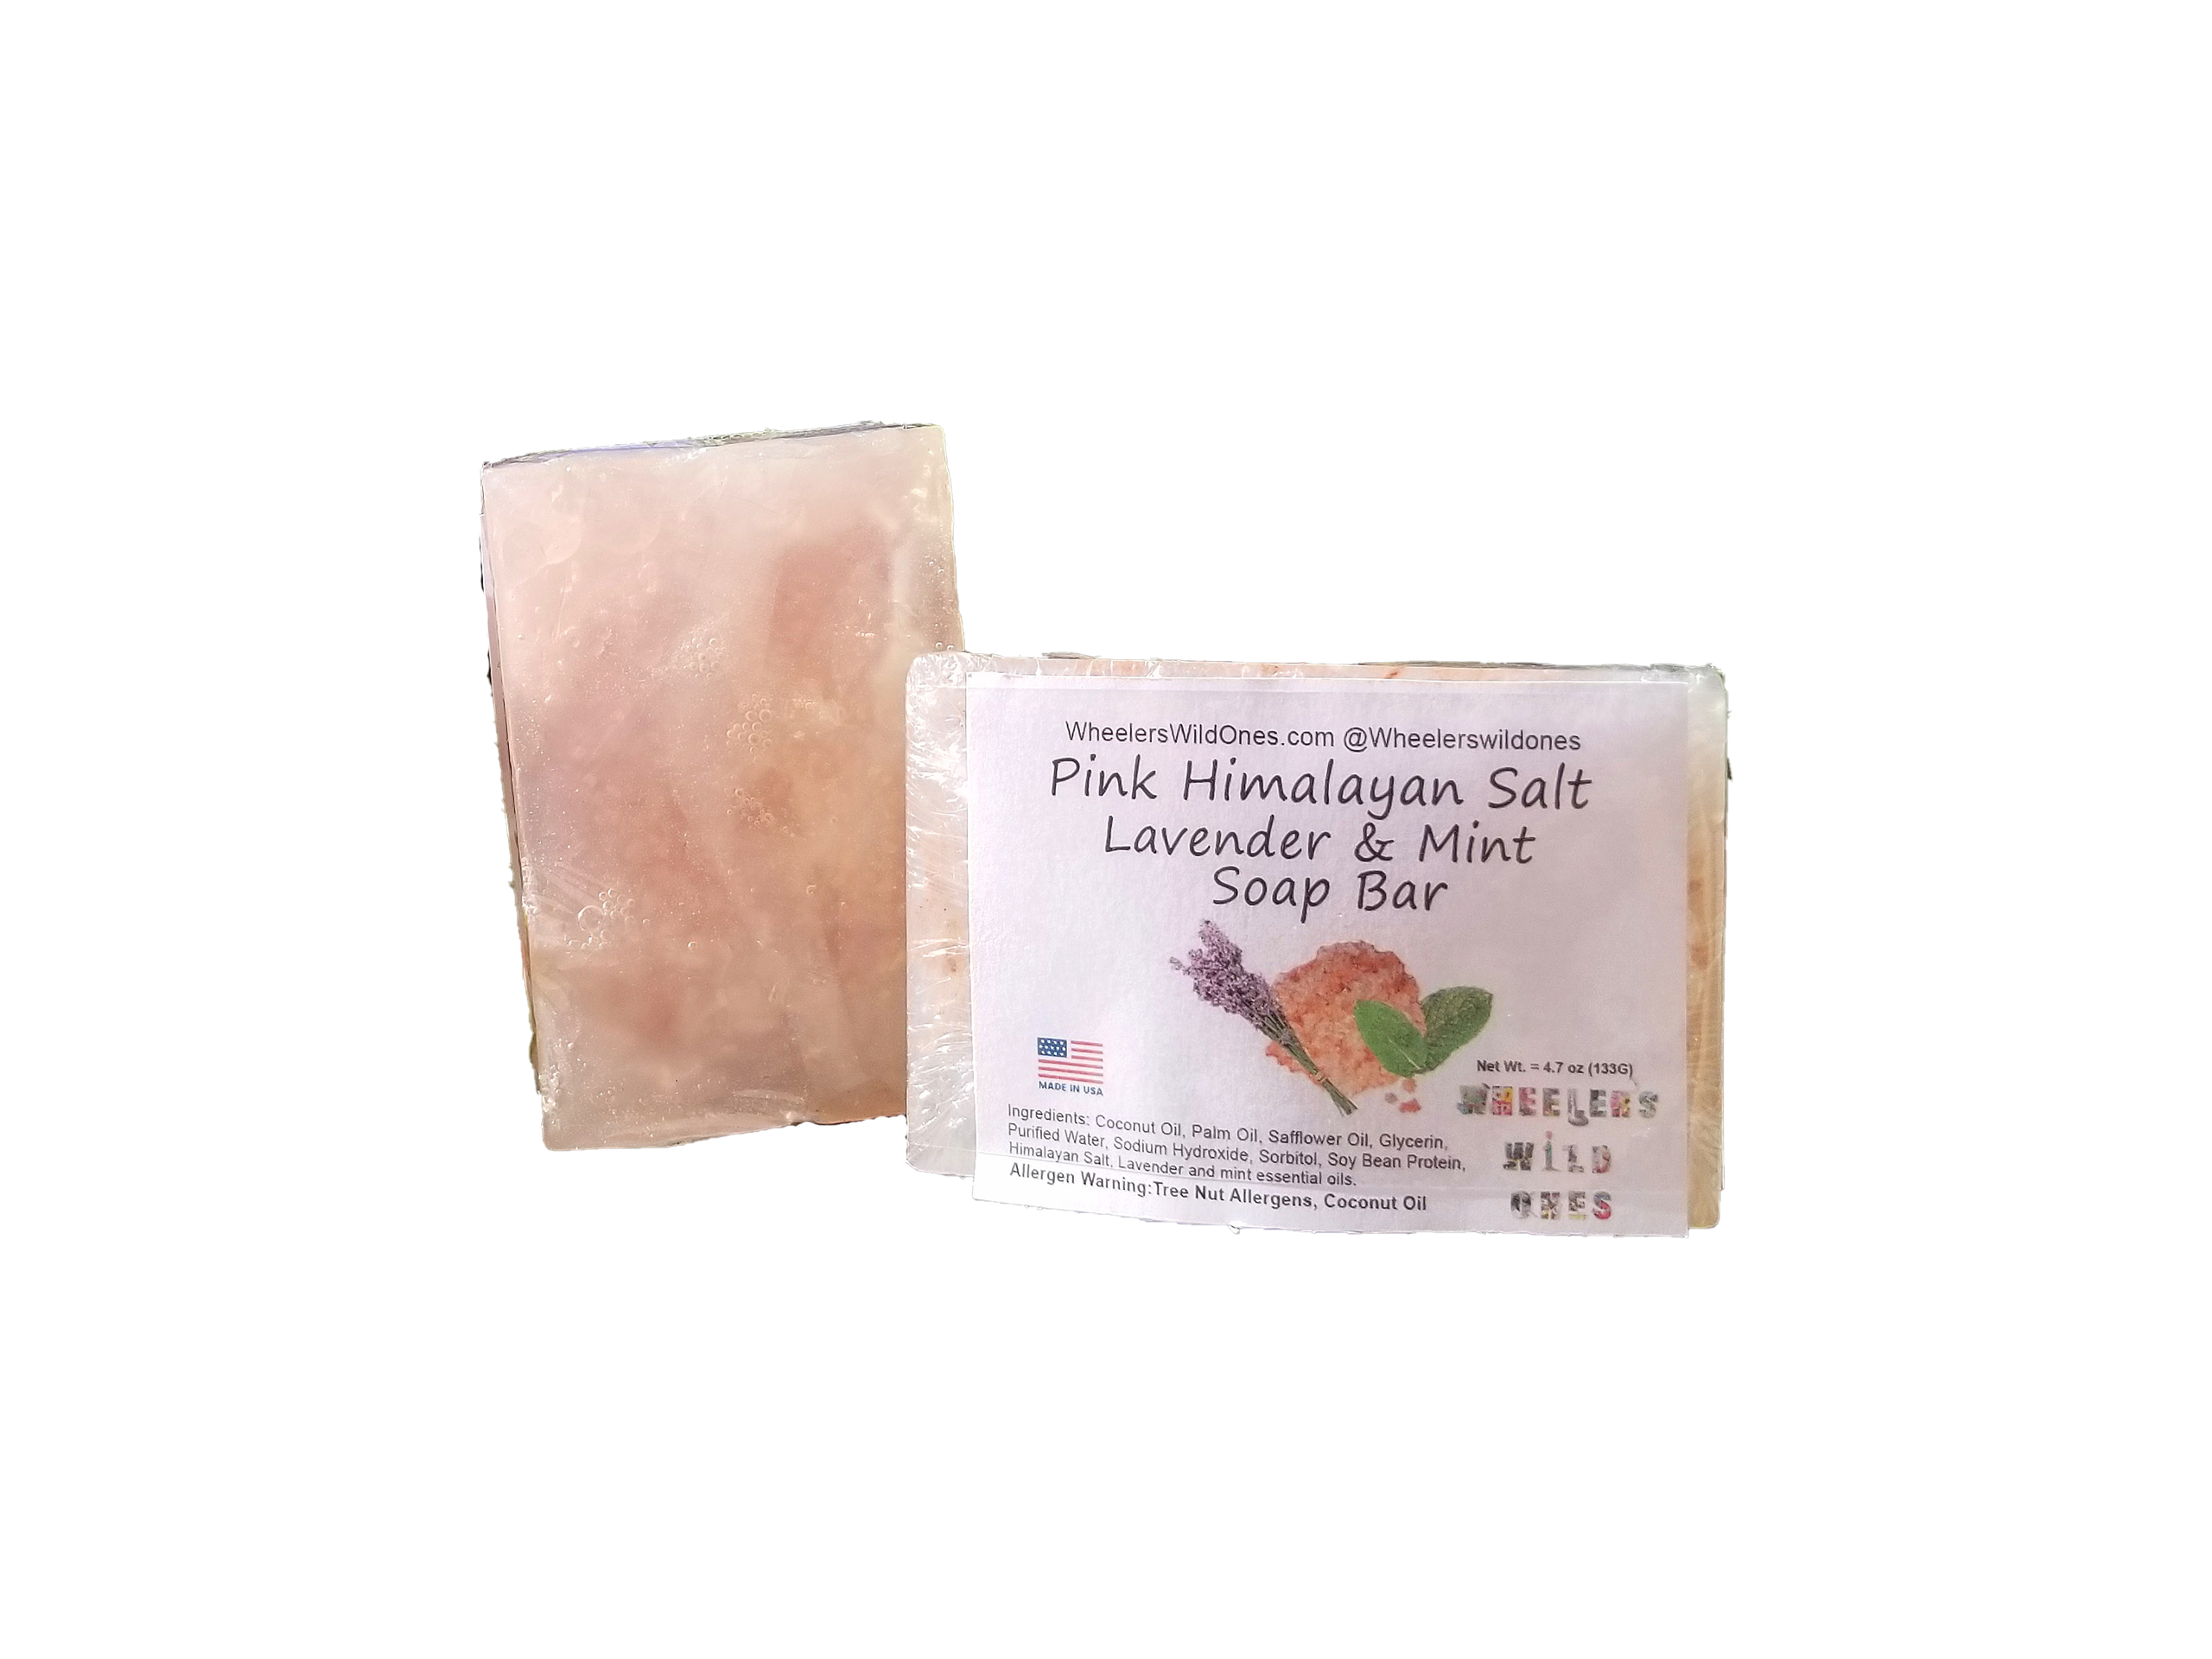 Traverse Bay Bath and Body- All natural handmade cold process bar  soap,lavender Rose Himalayan pink salt, essential oil soap. 3 bar pack 16 +  . Made in the USA, बॉडी वॉश, बॉडी